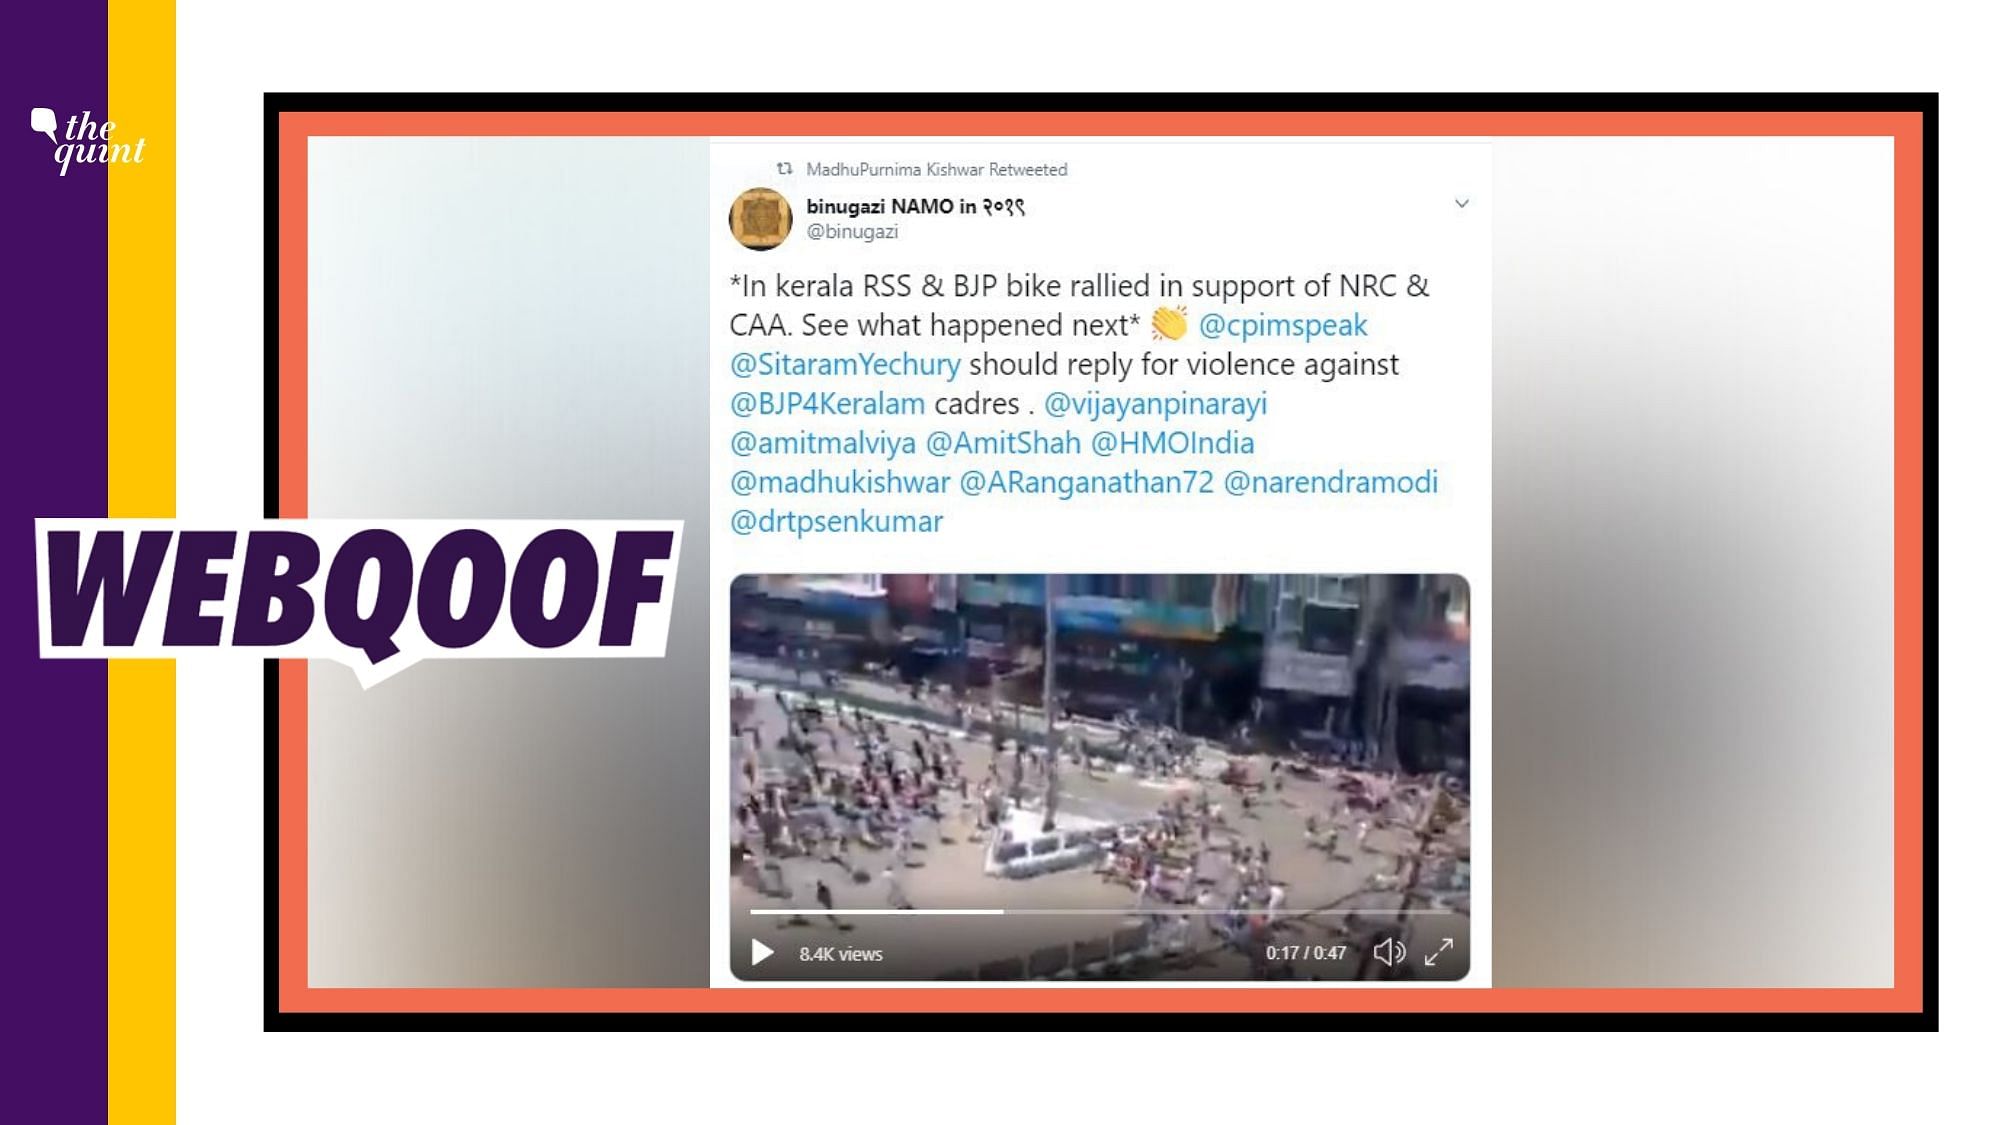 An old video from 2019 is being circulated with a claim that a pro-CAA rally was attacked in Kerala.